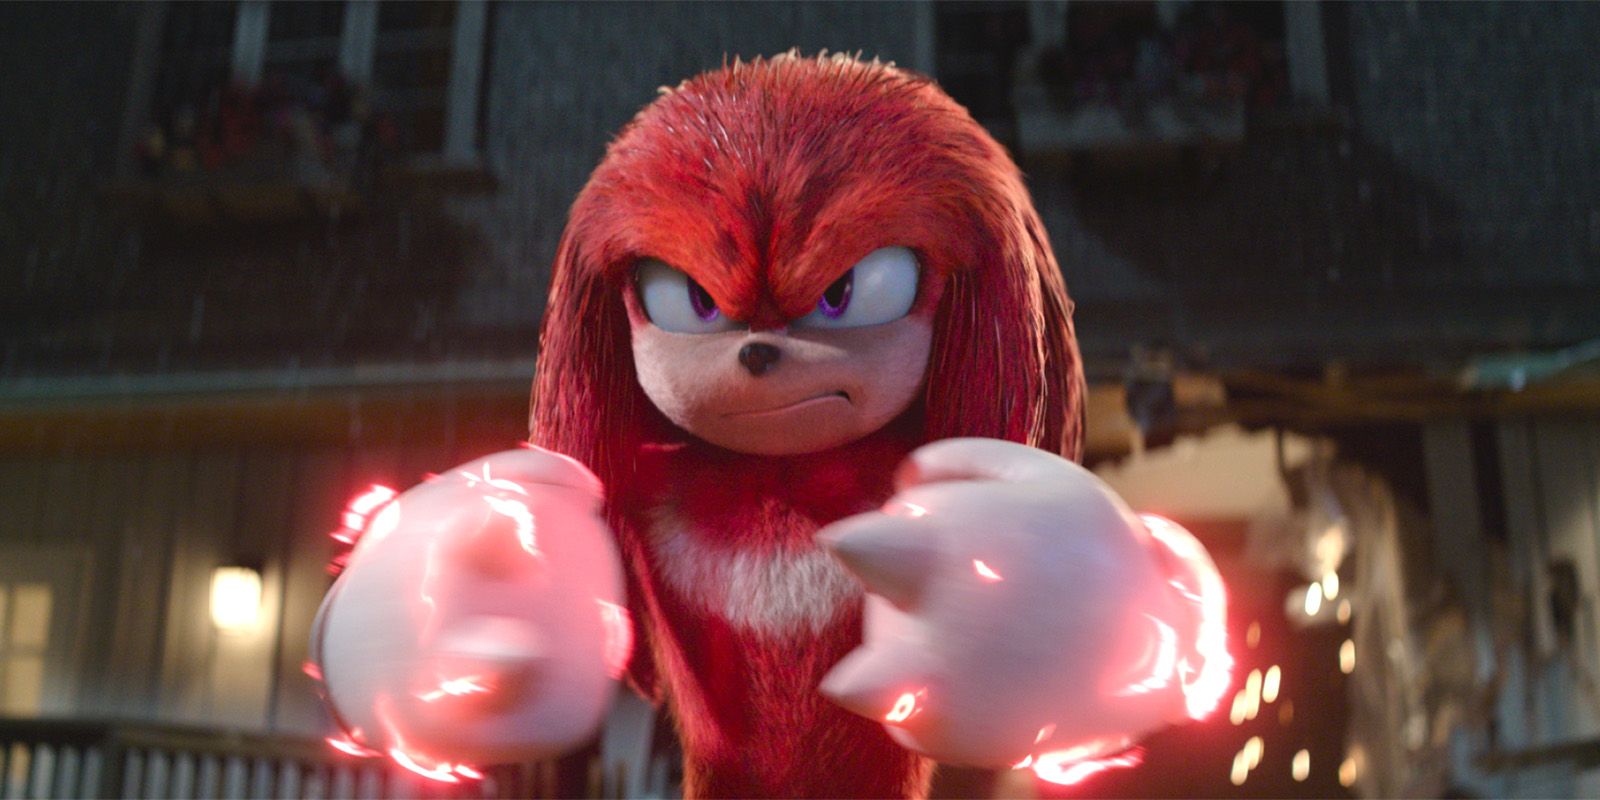 Knuckles powers up his fists in Sonic the Hedgehog 2